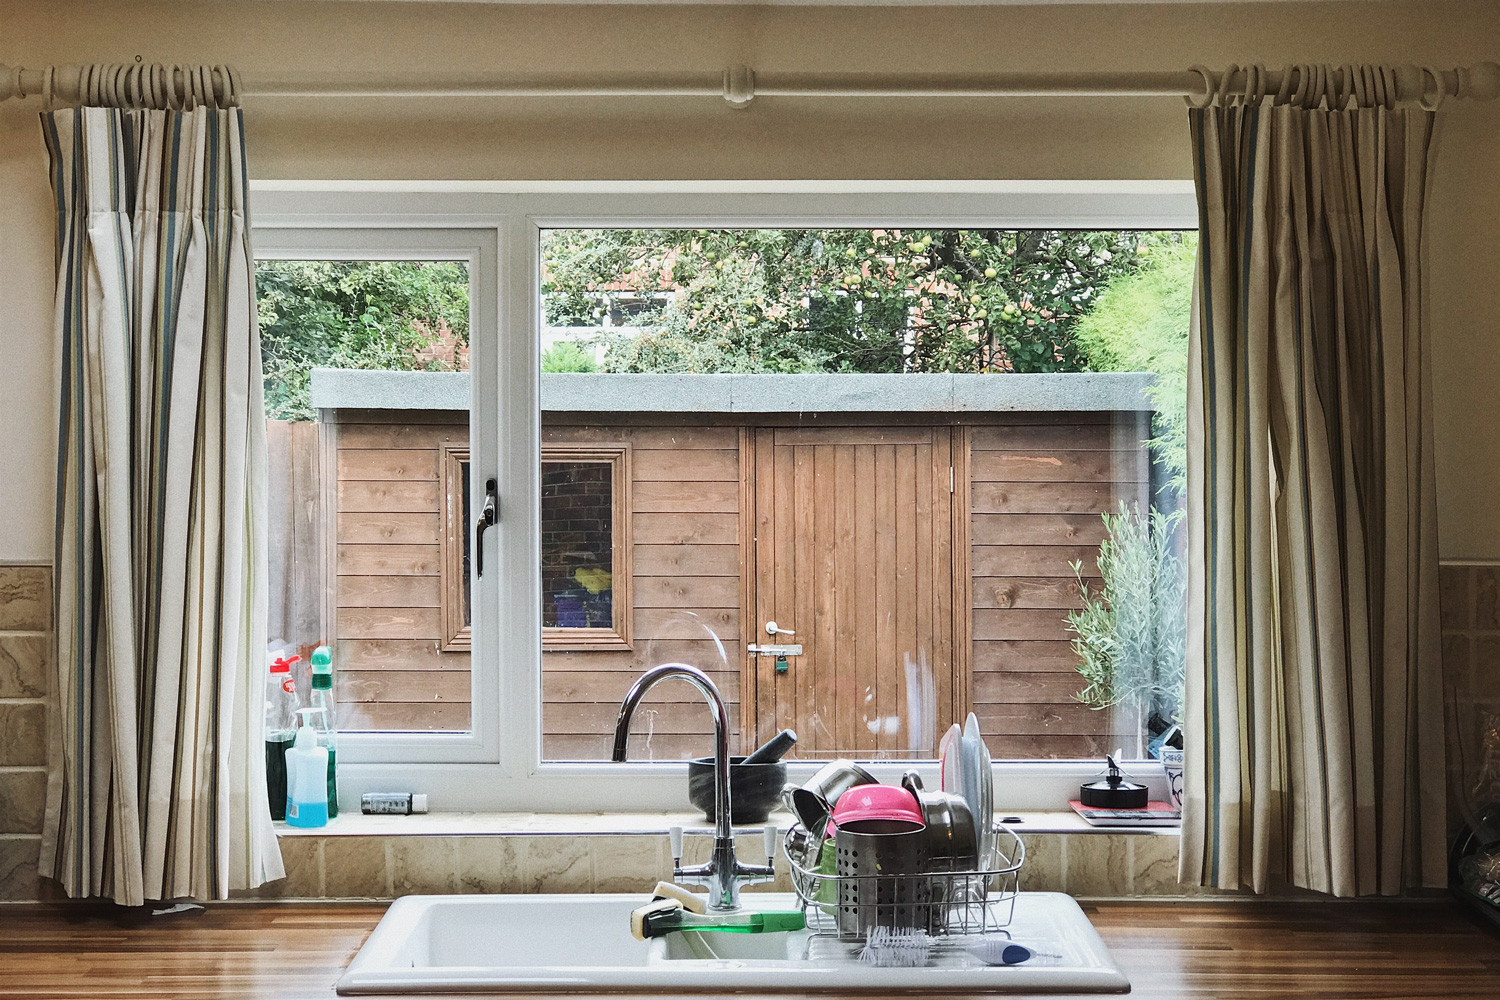 A view through an English kitchen window, the dishes are washed and stacked. A garden shed is visible in the background.